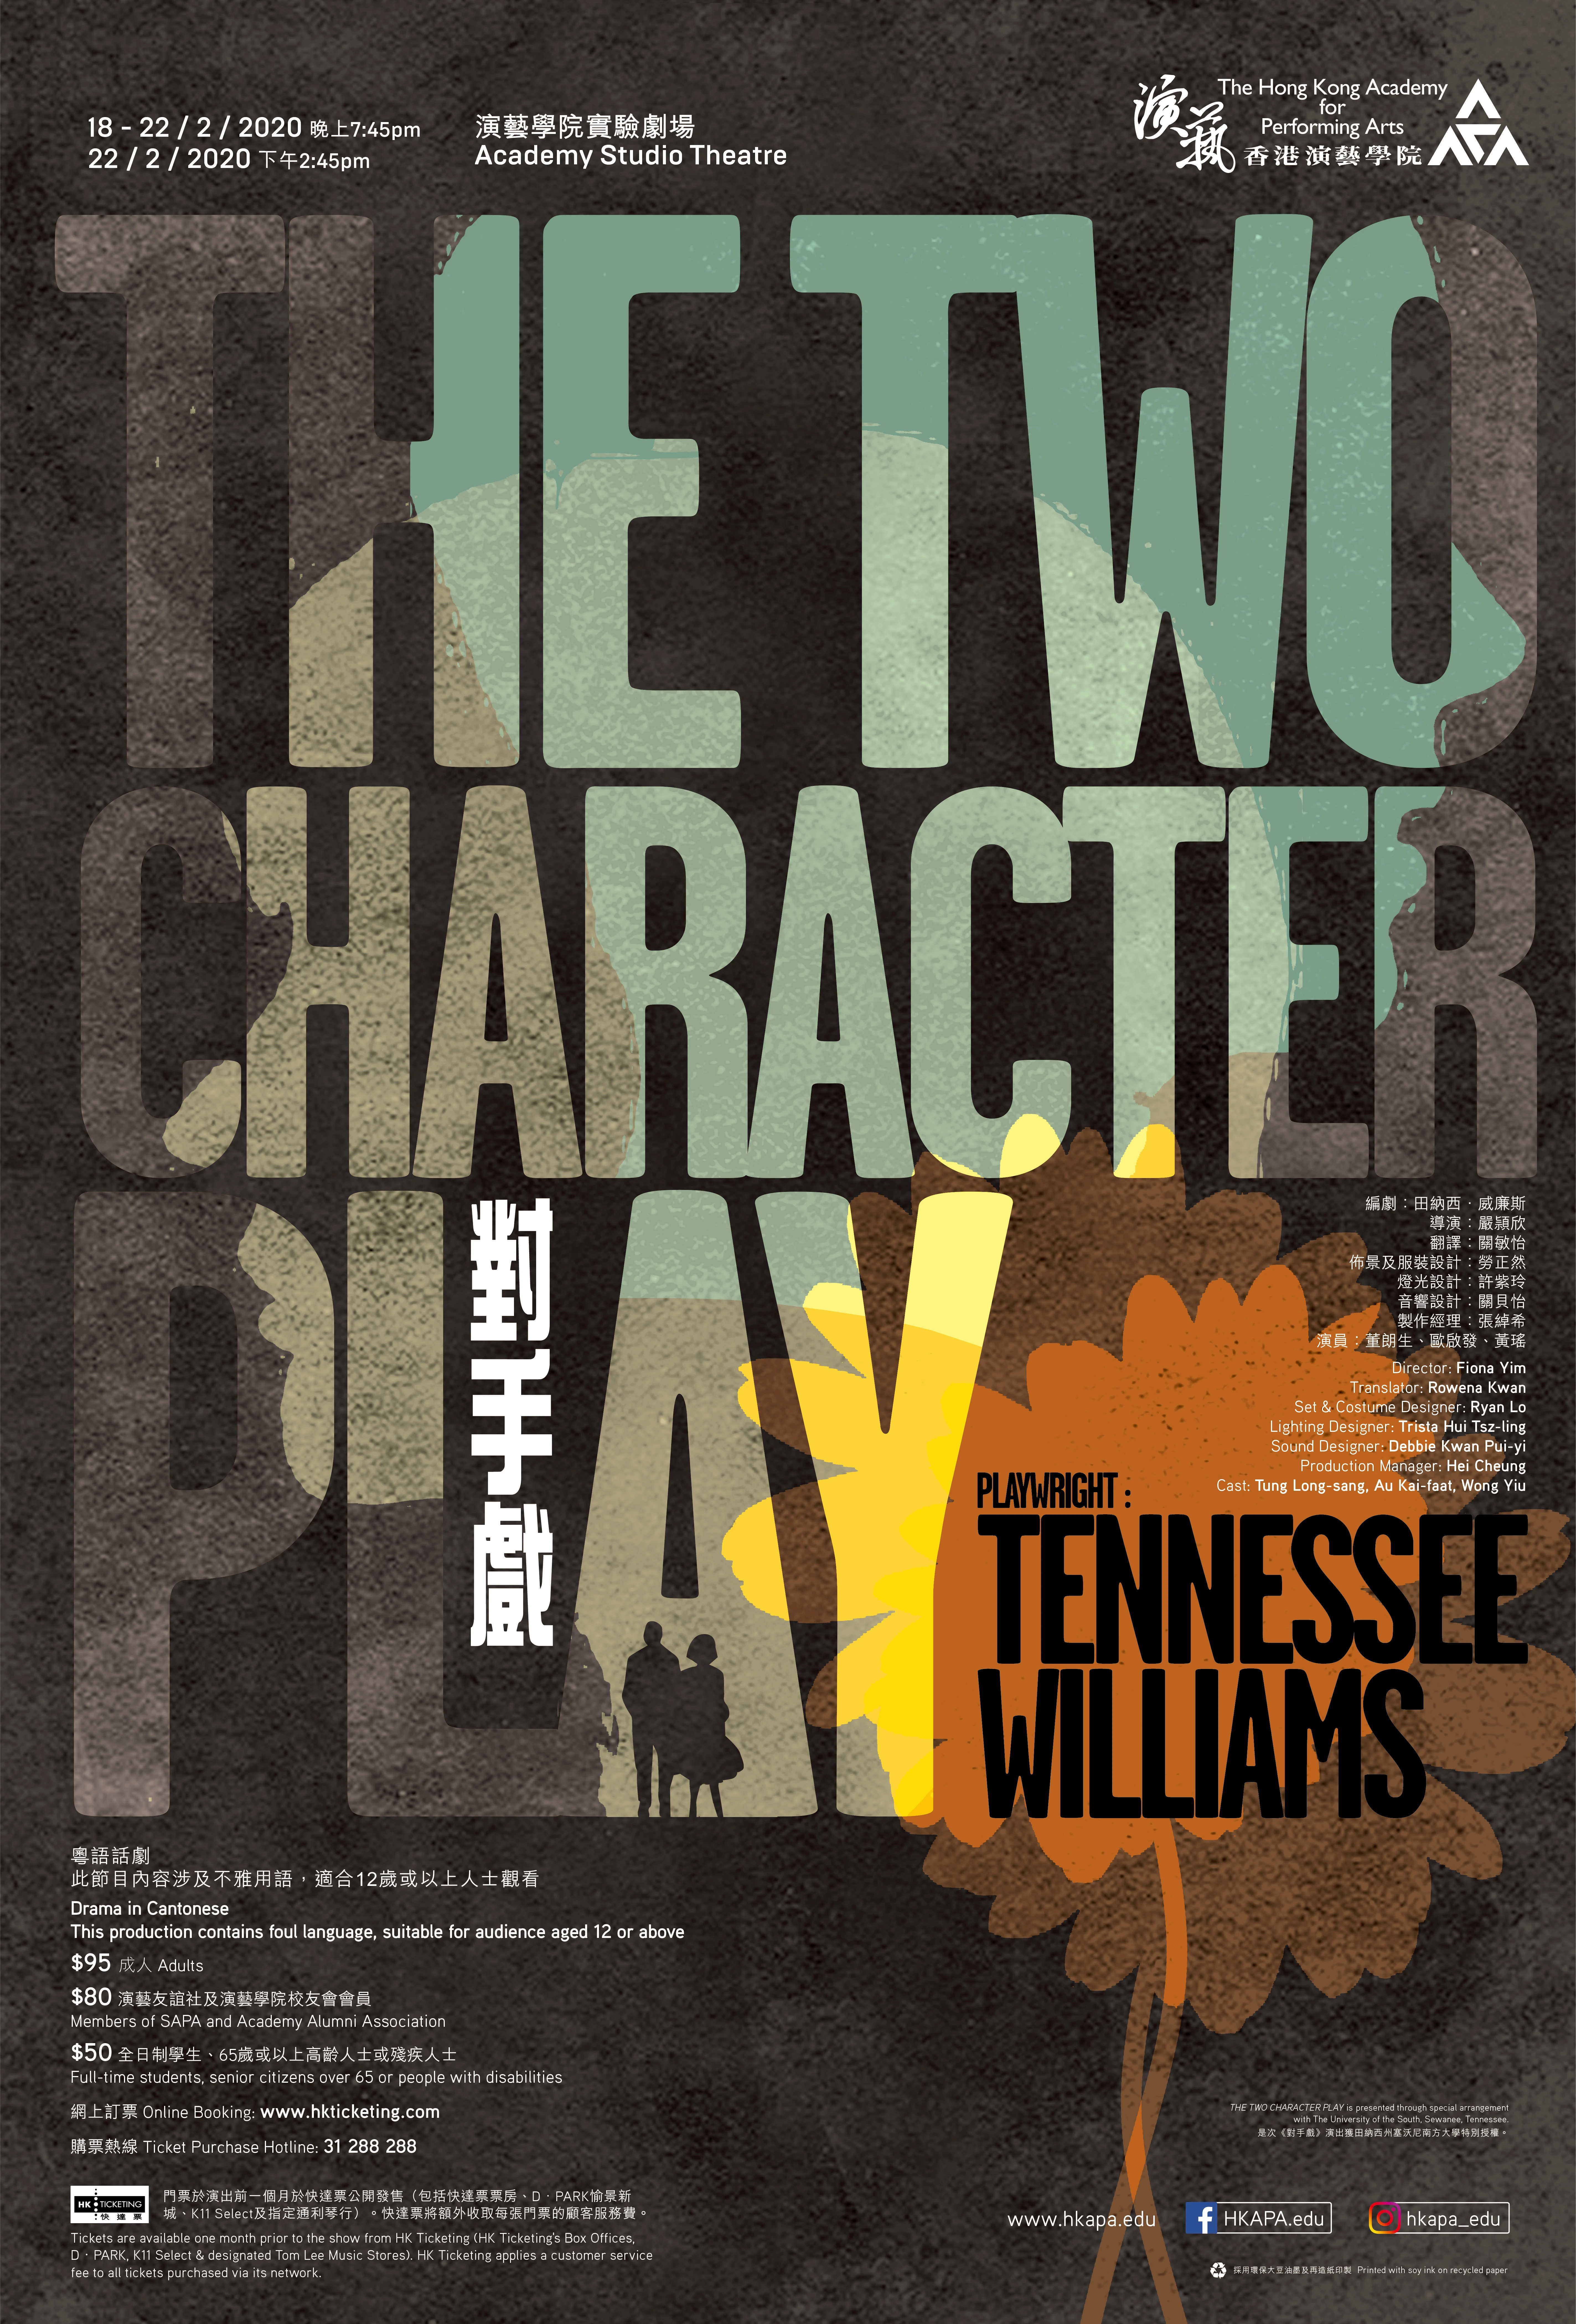 (CANCELLED) The Two Character Play by Tennessee Williams